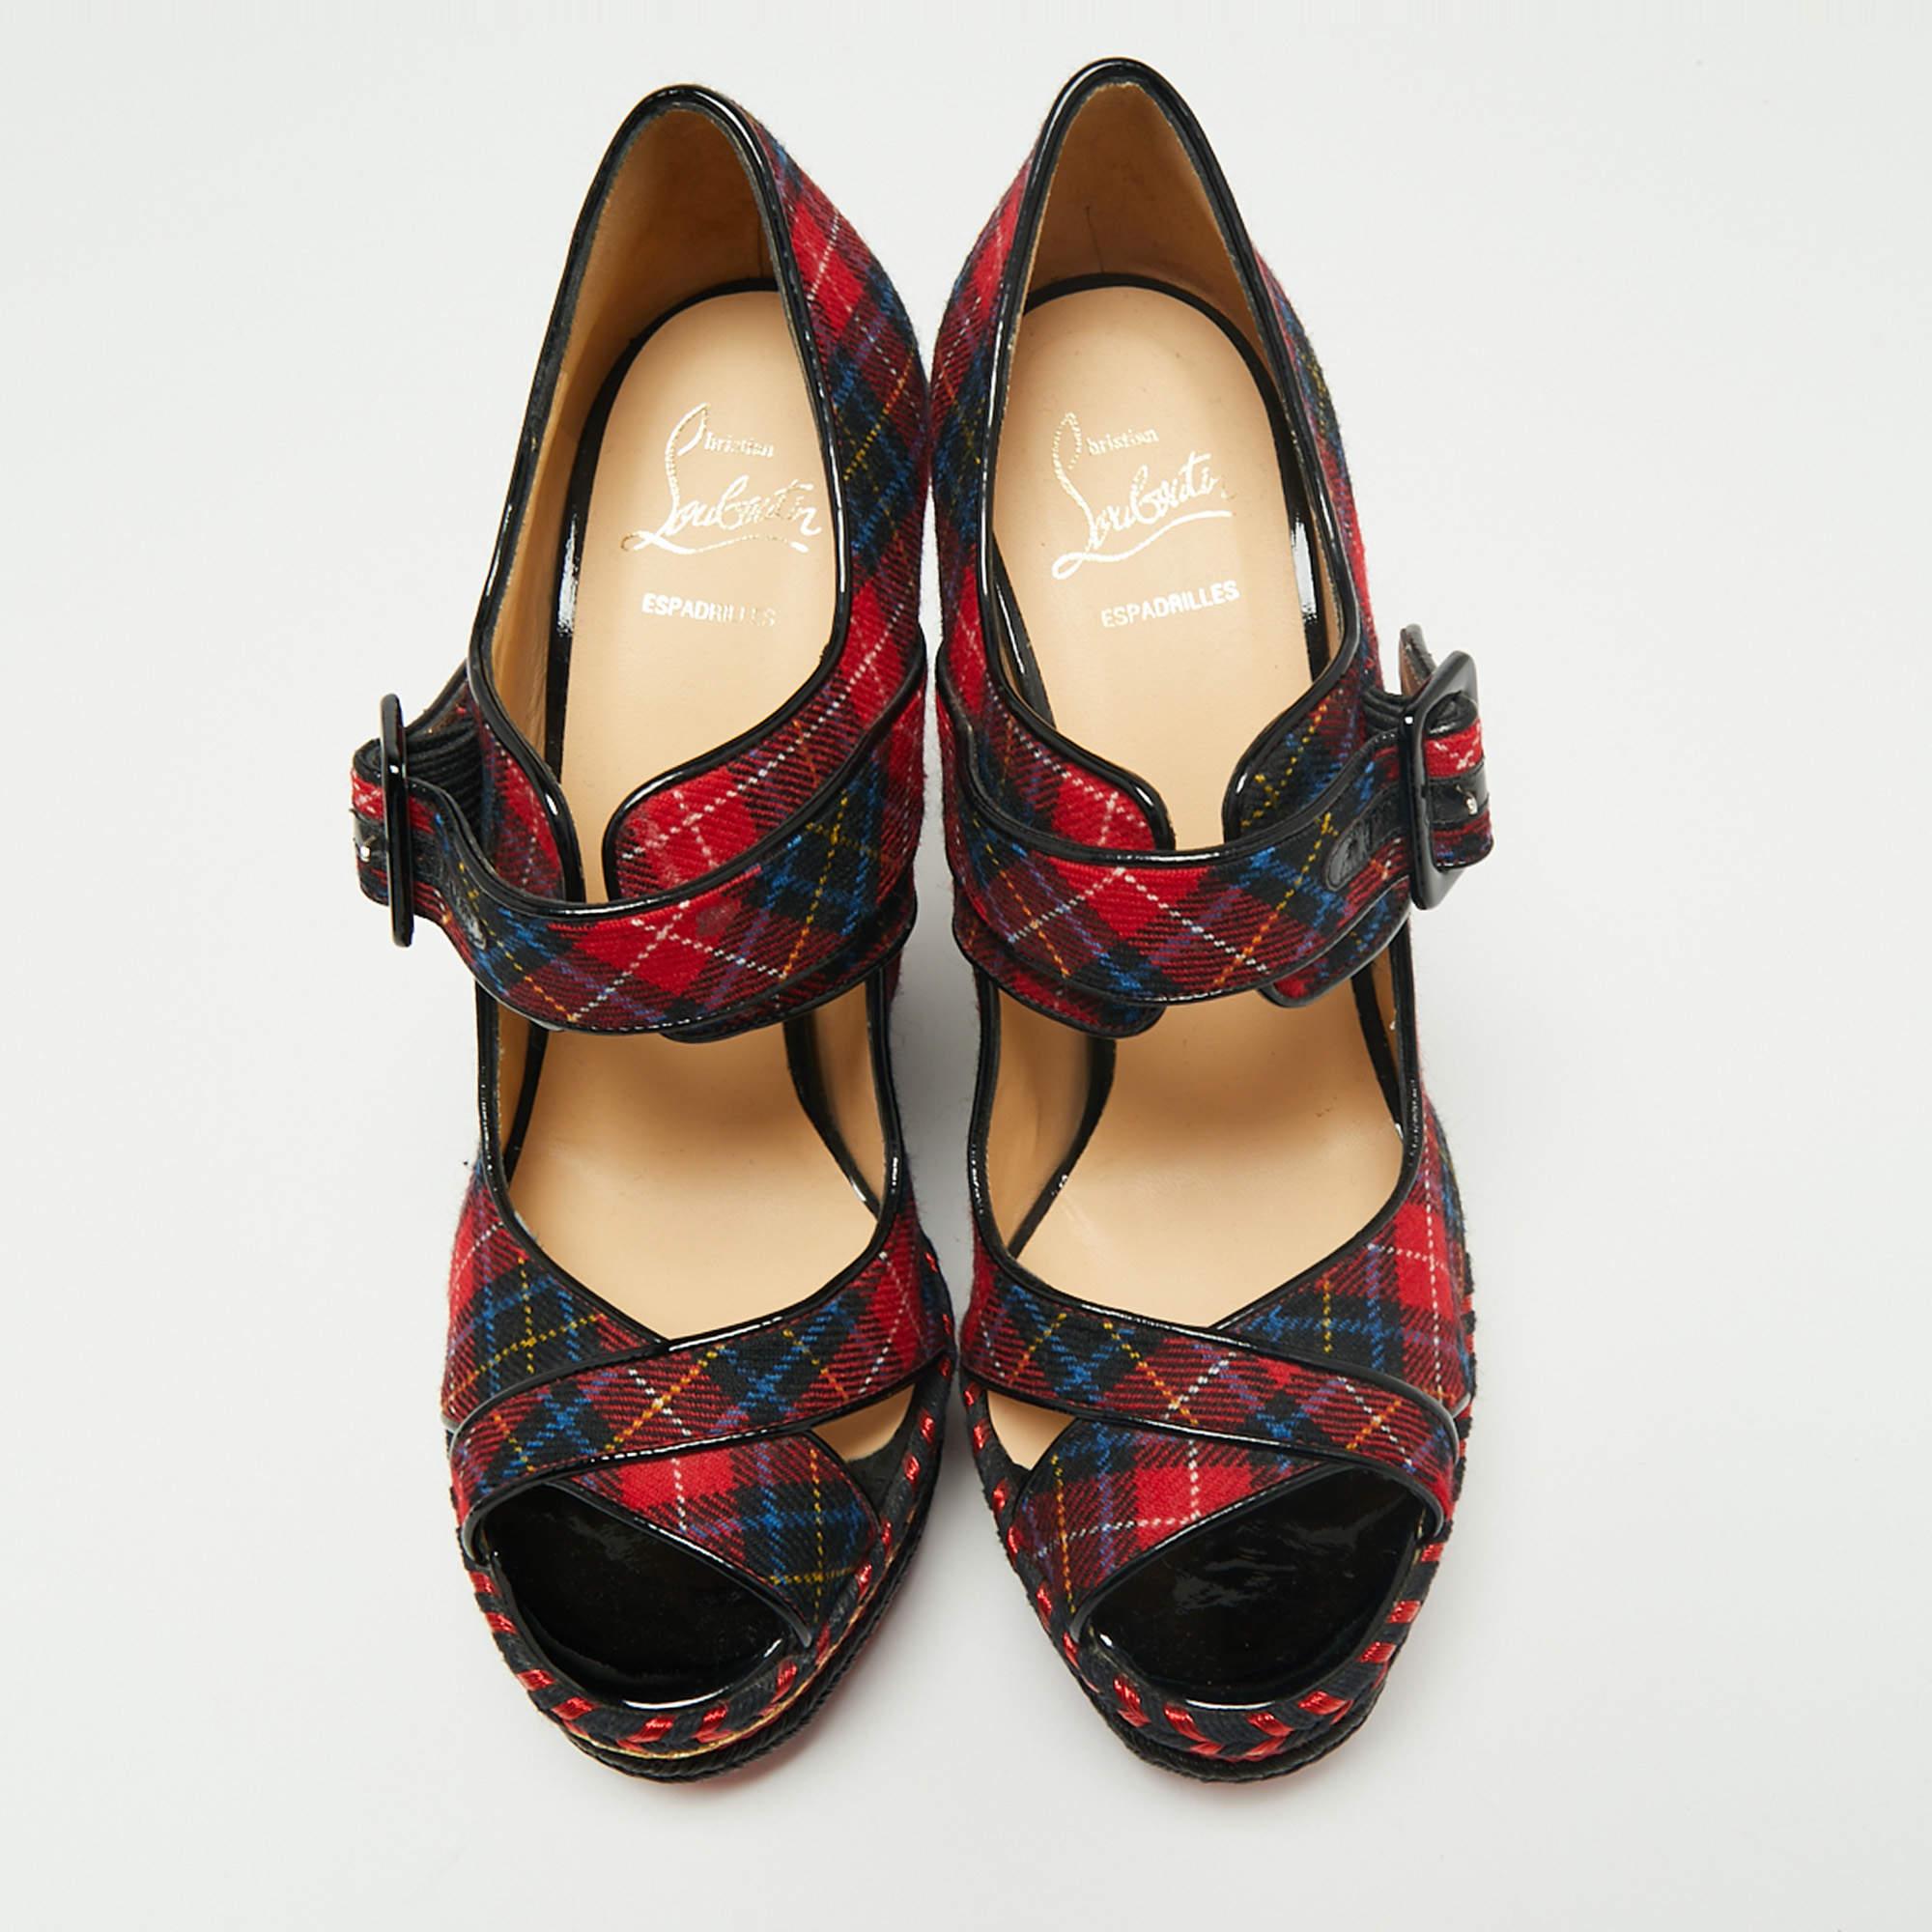 These pumps from Christian Louboutin are designed to bring comfort and style at the same time. They are made from tartan-print fabric and added with peep toes, buckled straps, leather lining, and wedge heels.

